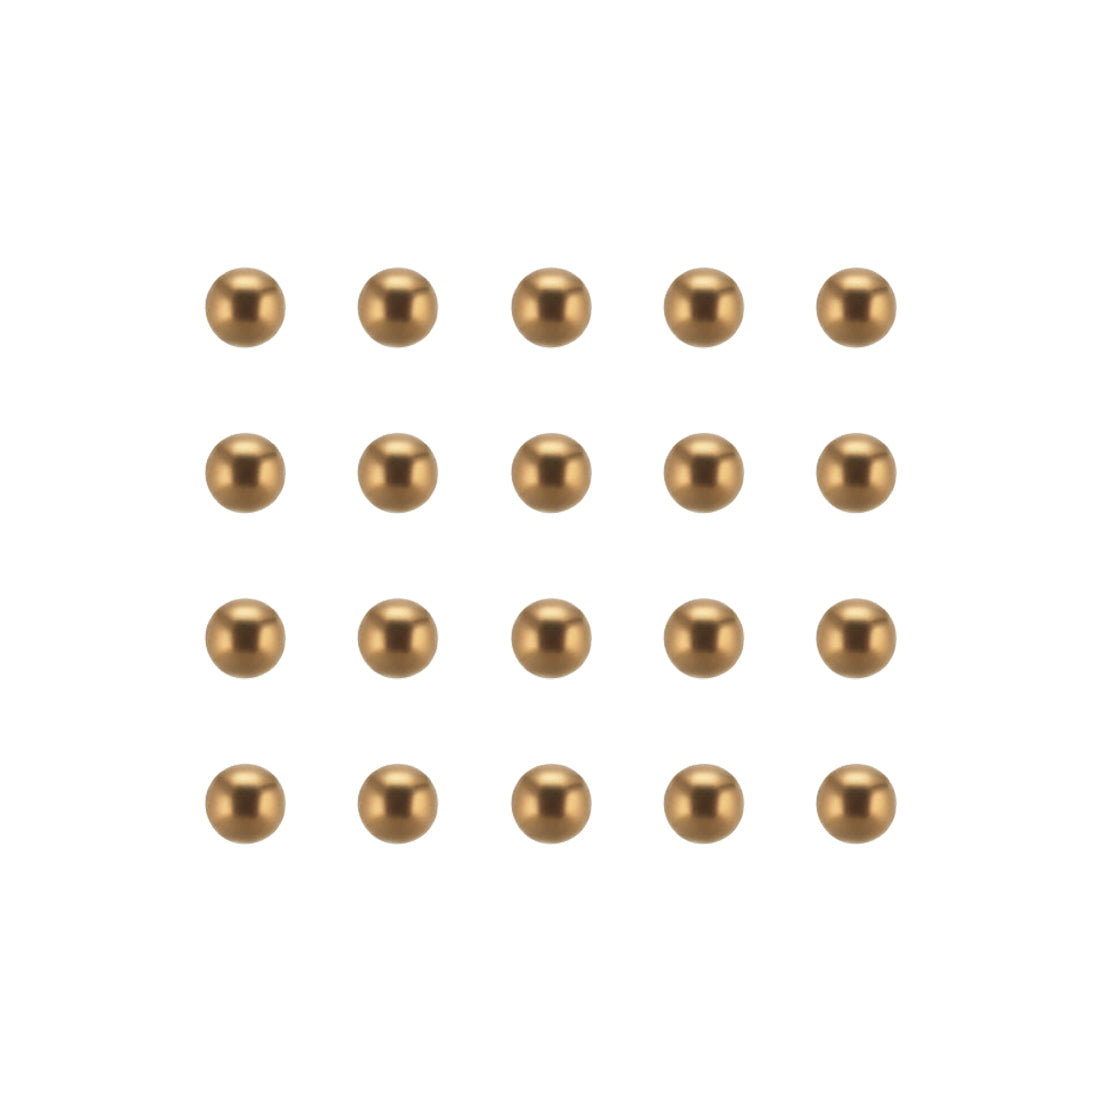 Uxcell Uxcell 2mm Precision Solid Brass Bearing Balls 100pcs